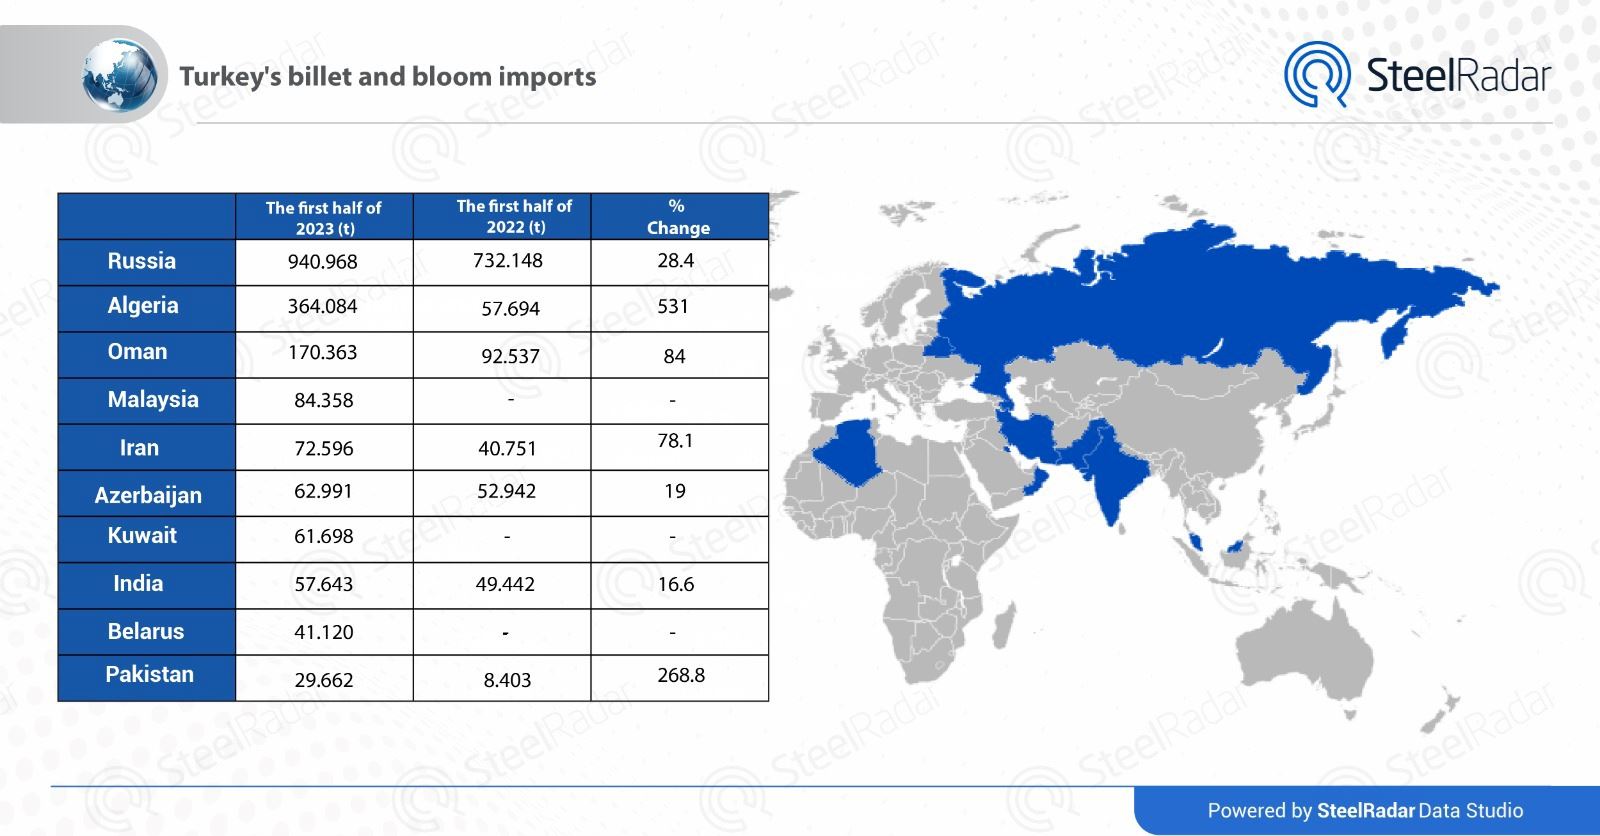 Iran's billet and bloom exports to Turkey increase by 78% in the first half of 2023